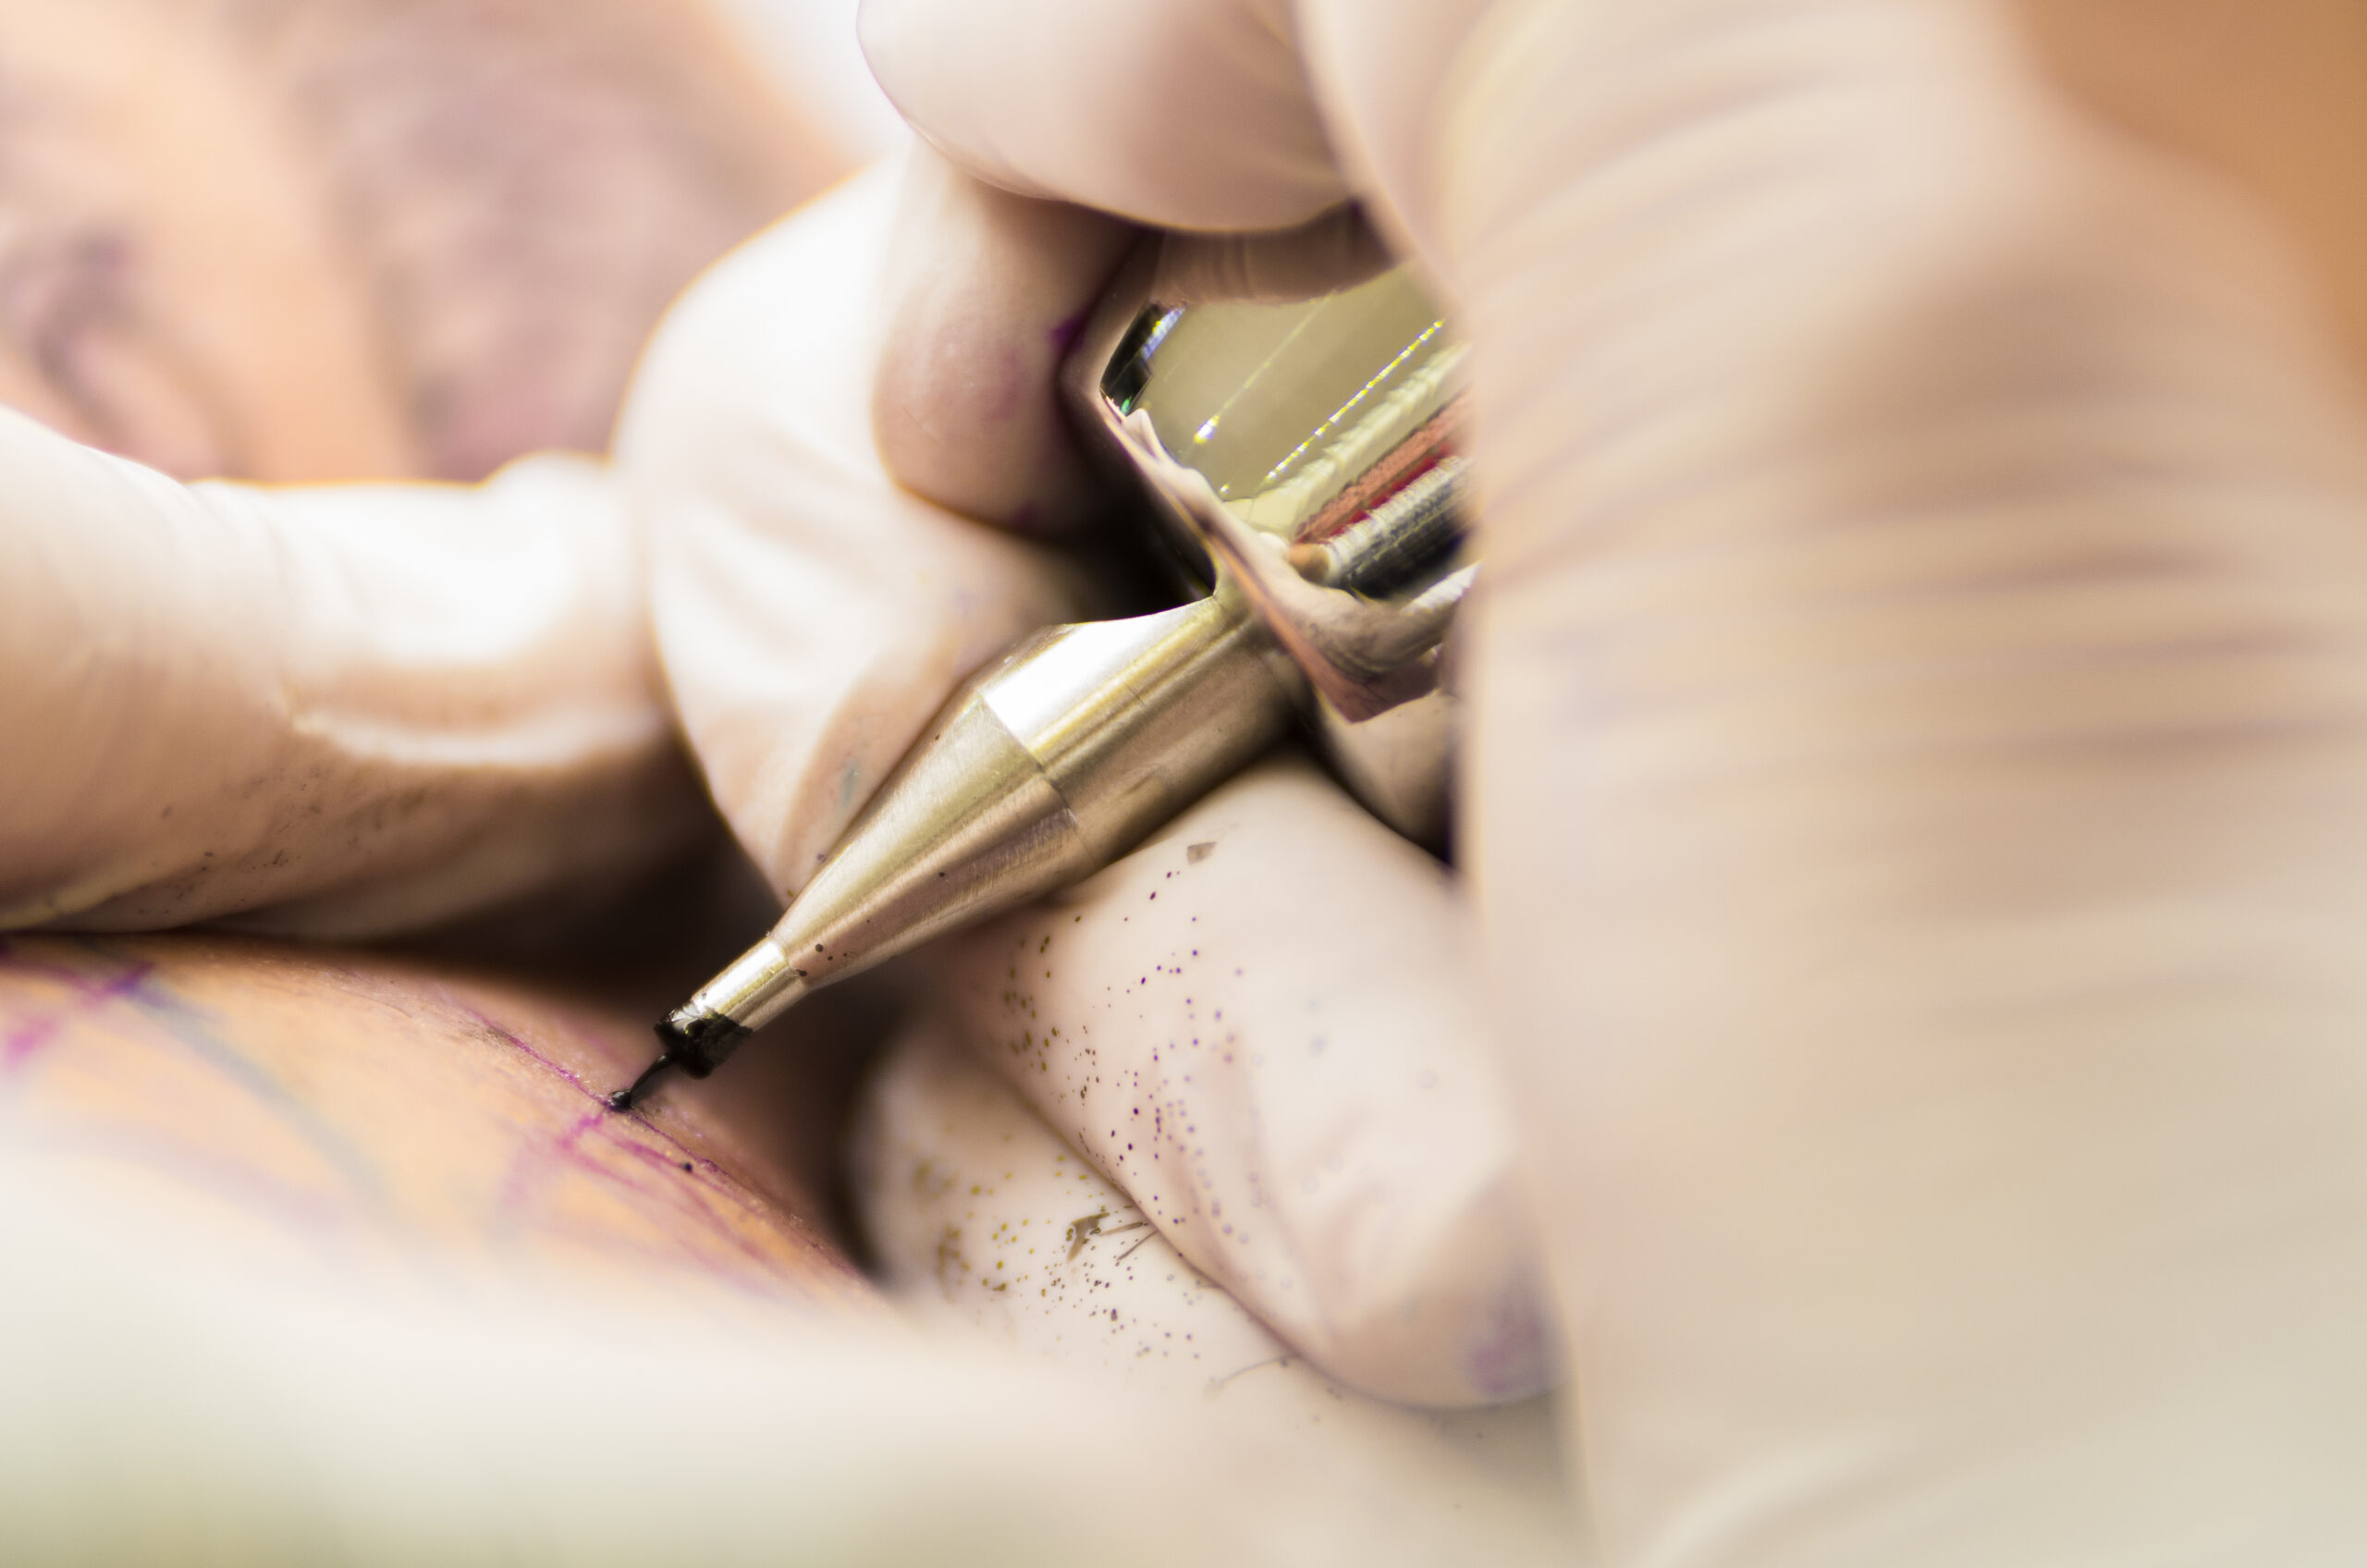 Tattoos Are Permanent But The Science Behind Them Just Shifted